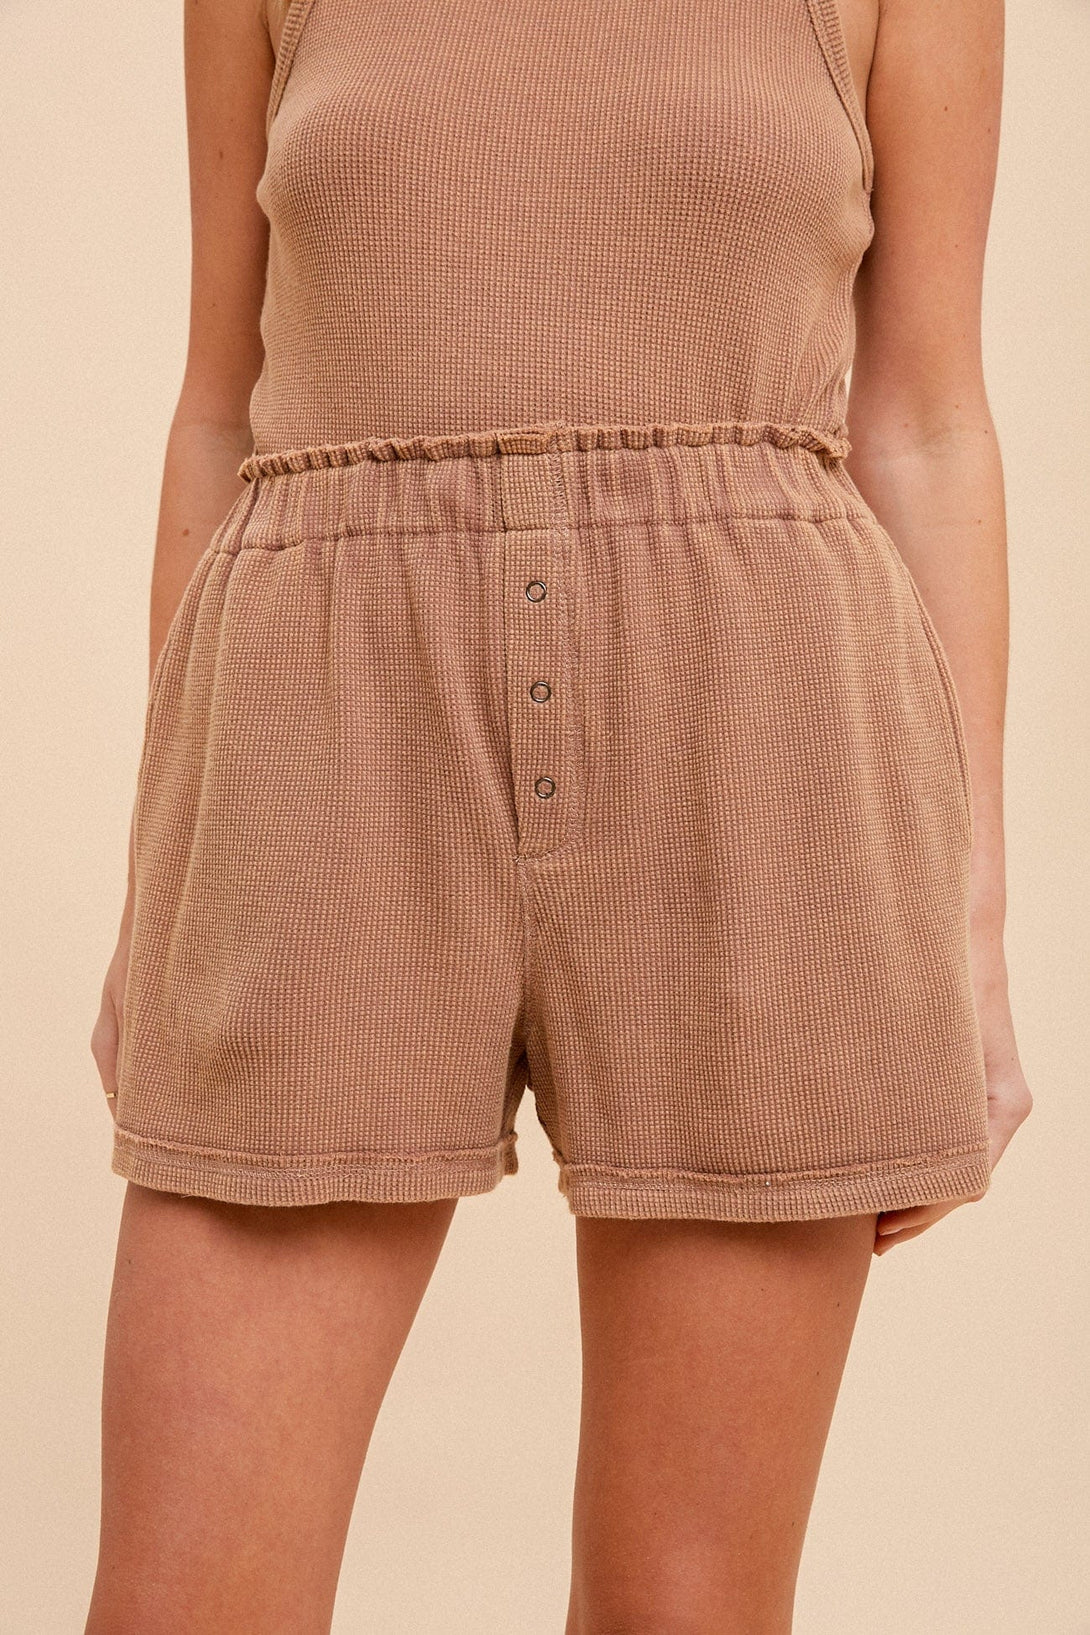 Hem & Thread Distress Show Washed Thermal Pull On Shorts